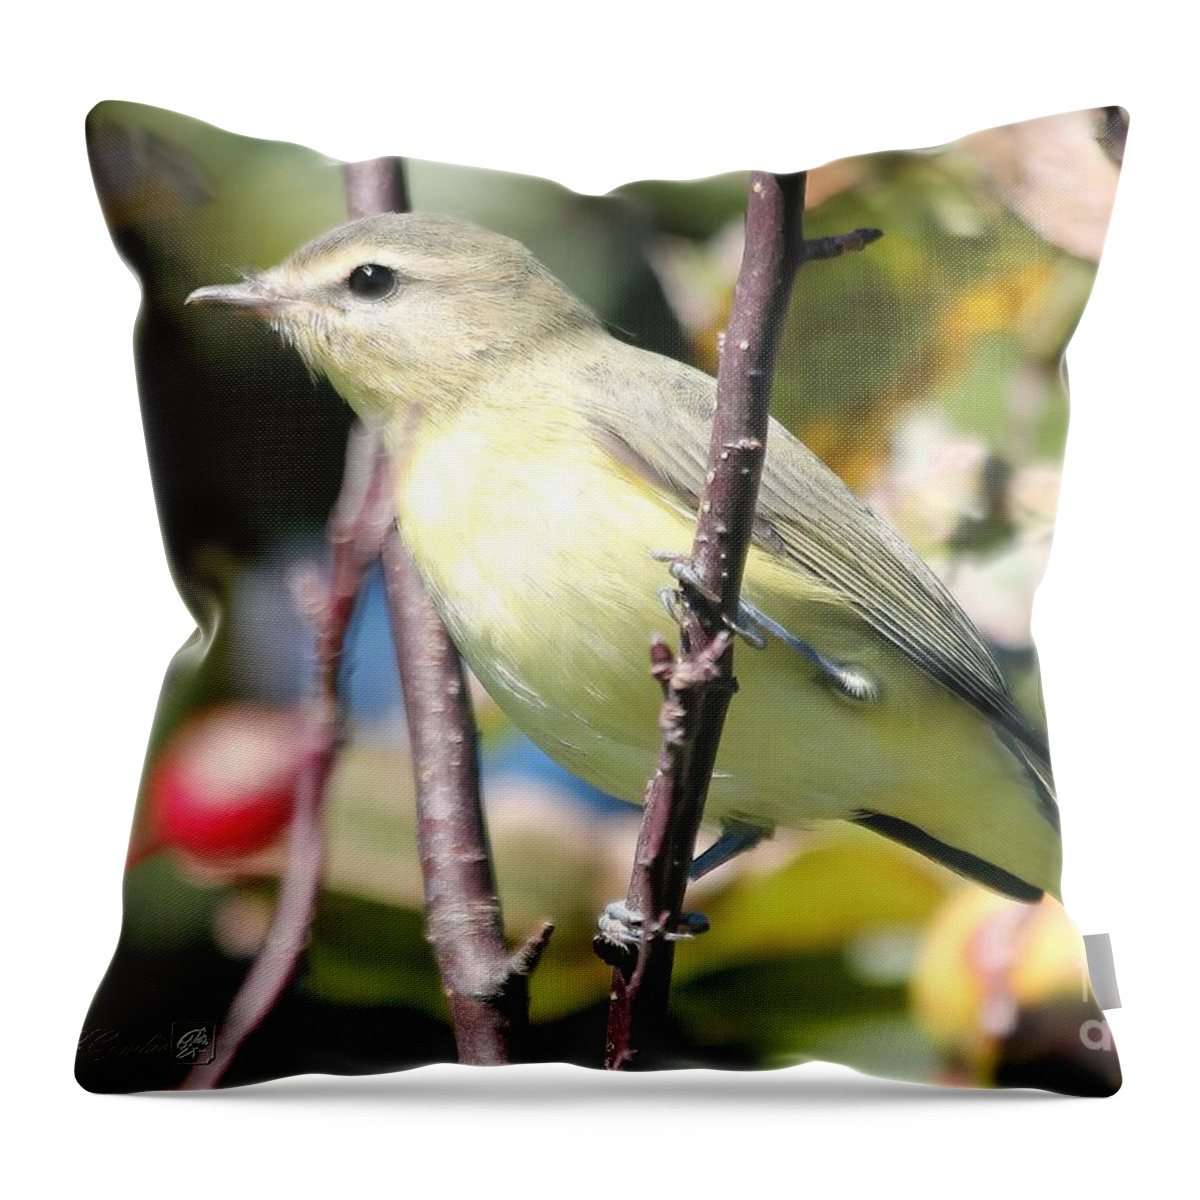 Mccombie Throw Pillow featuring the photograph Female Tennessee Warbler #1 by J McCombie